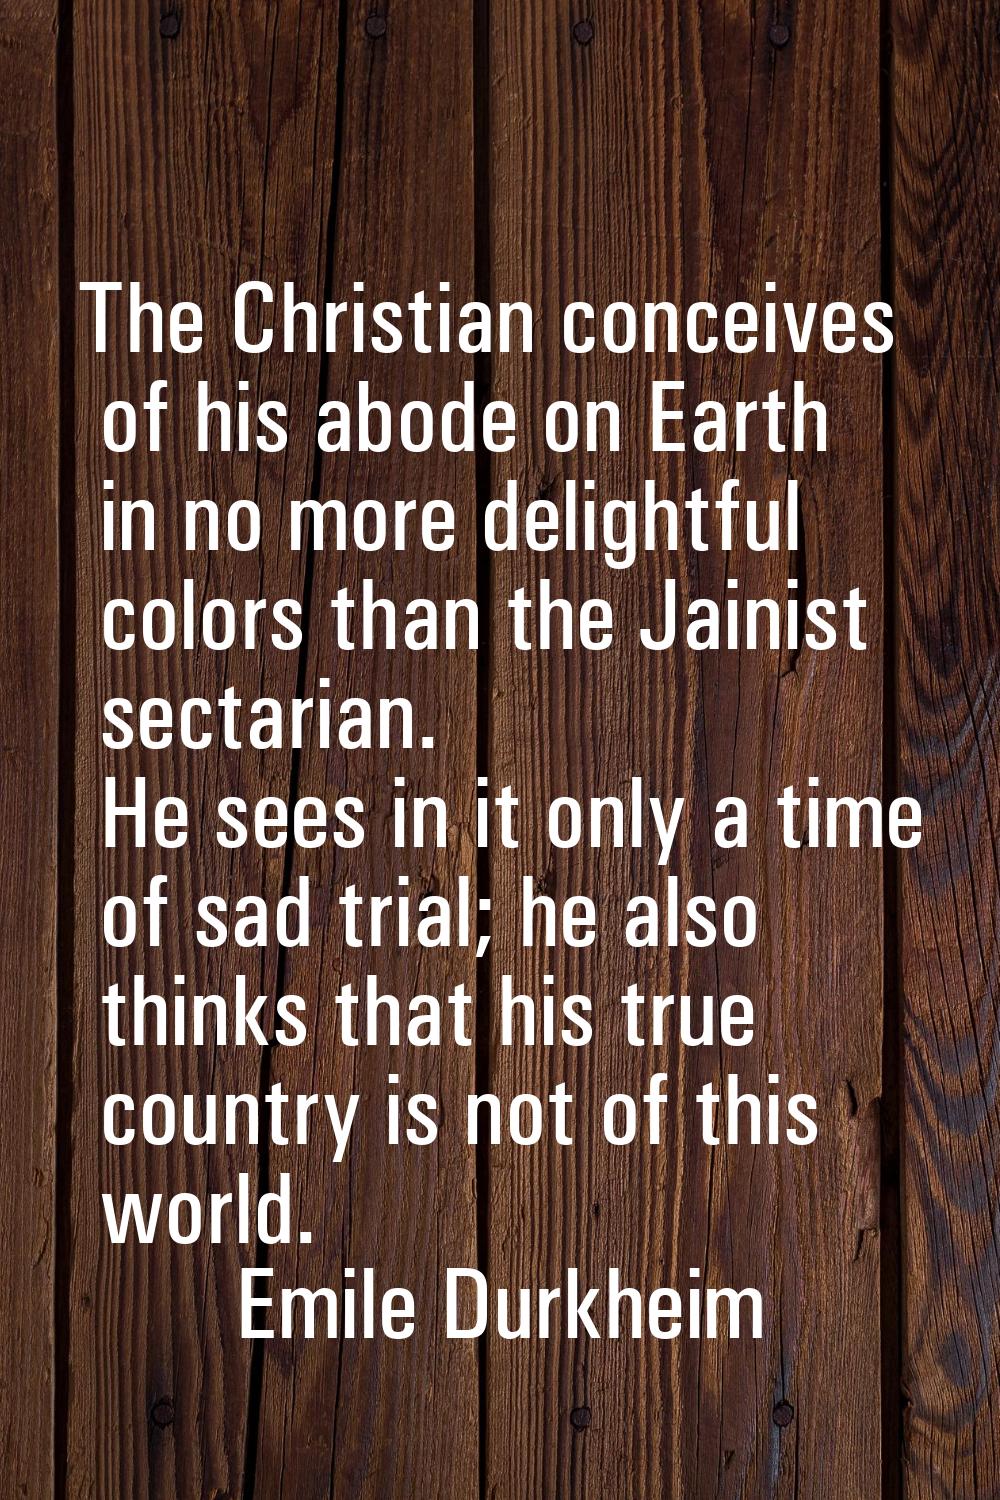 The Christian conceives of his abode on Earth in no more delightful colors than the Jainist sectari